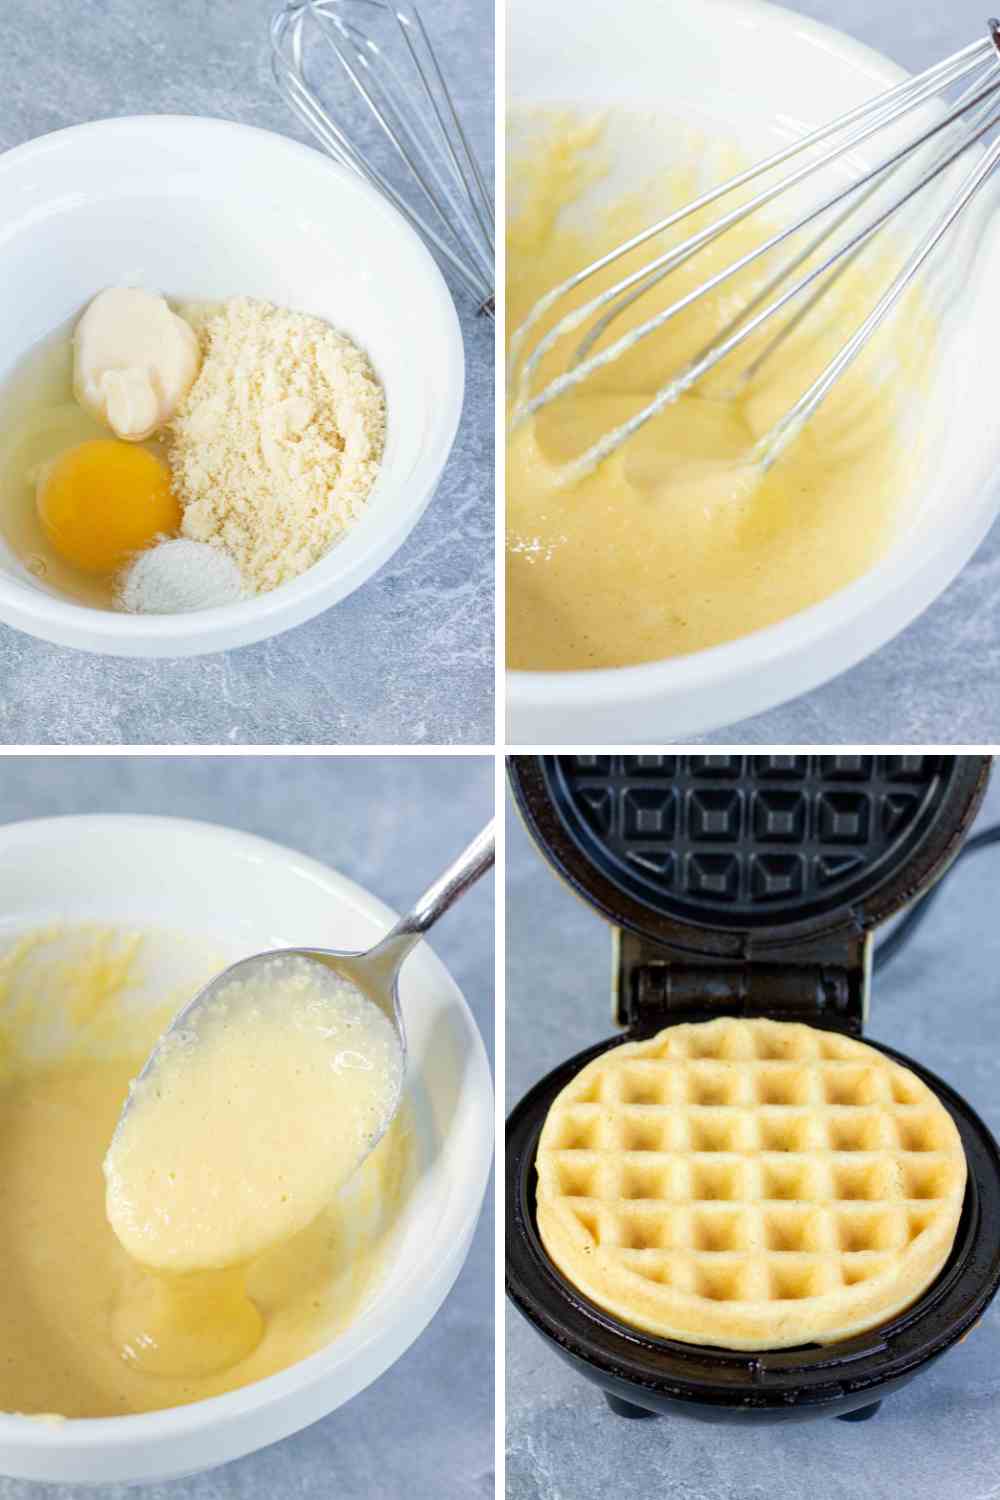 https://thereislifeafterwheat.com/wp-content/uploads/2023/01/How-to-Make-Wonder-Bread-Chaffles.jpg